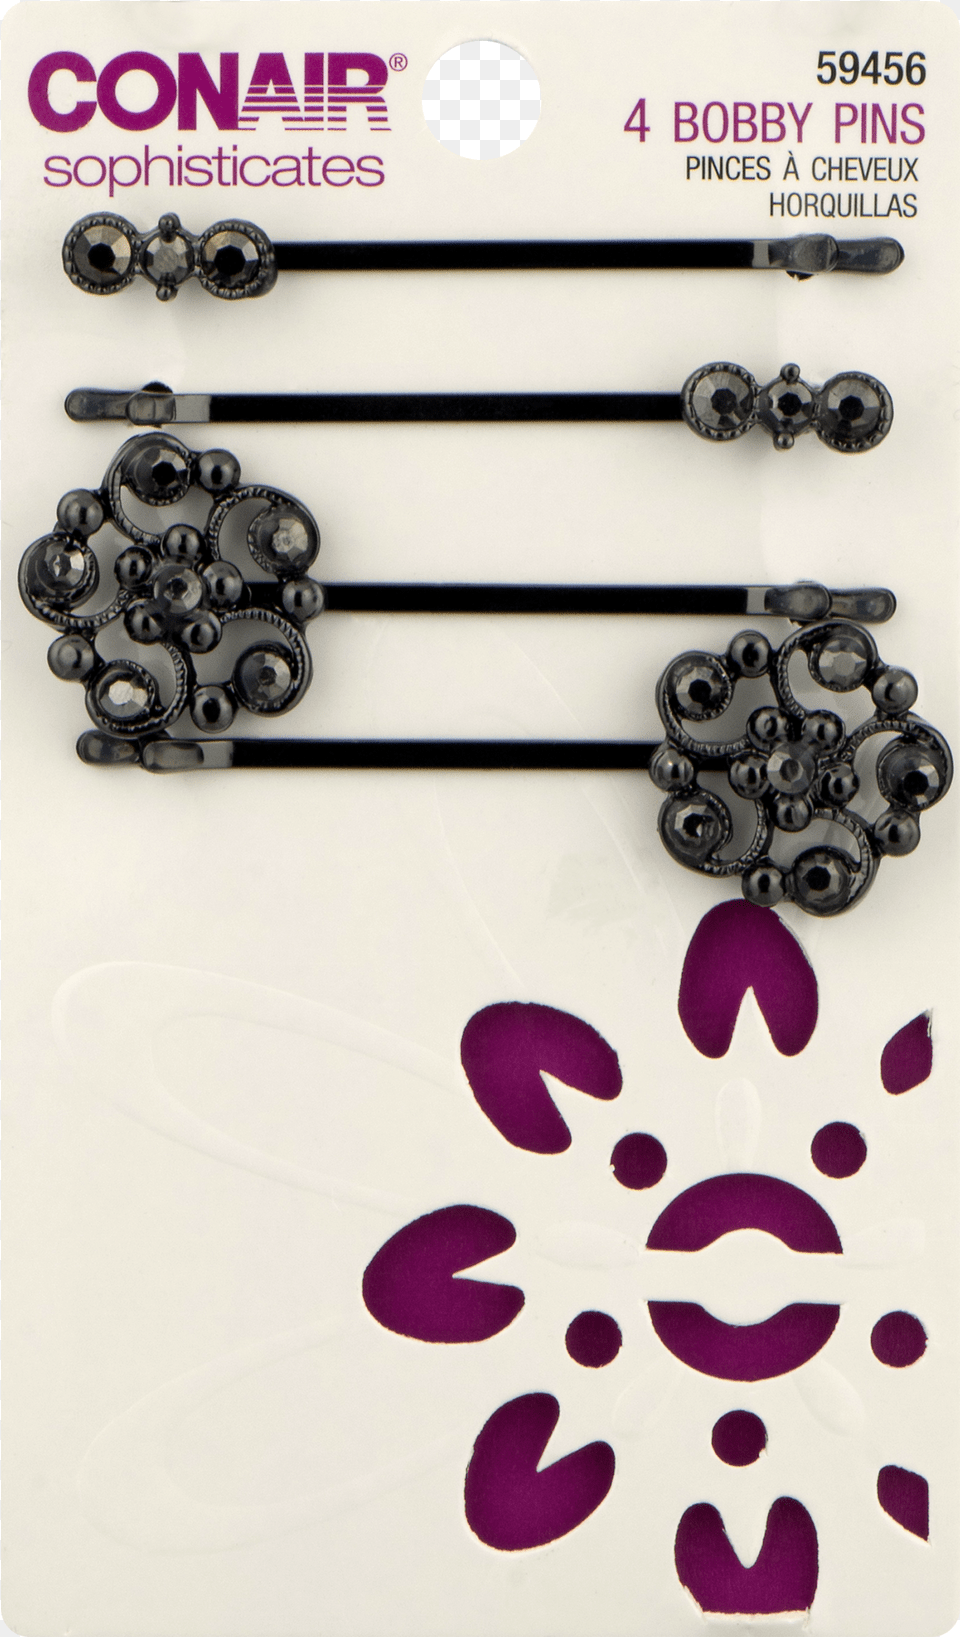 Conair Sophisticates Bobby Pins 4 Pins, Accessories, Hair Slide, Jewelry, Necklace Png